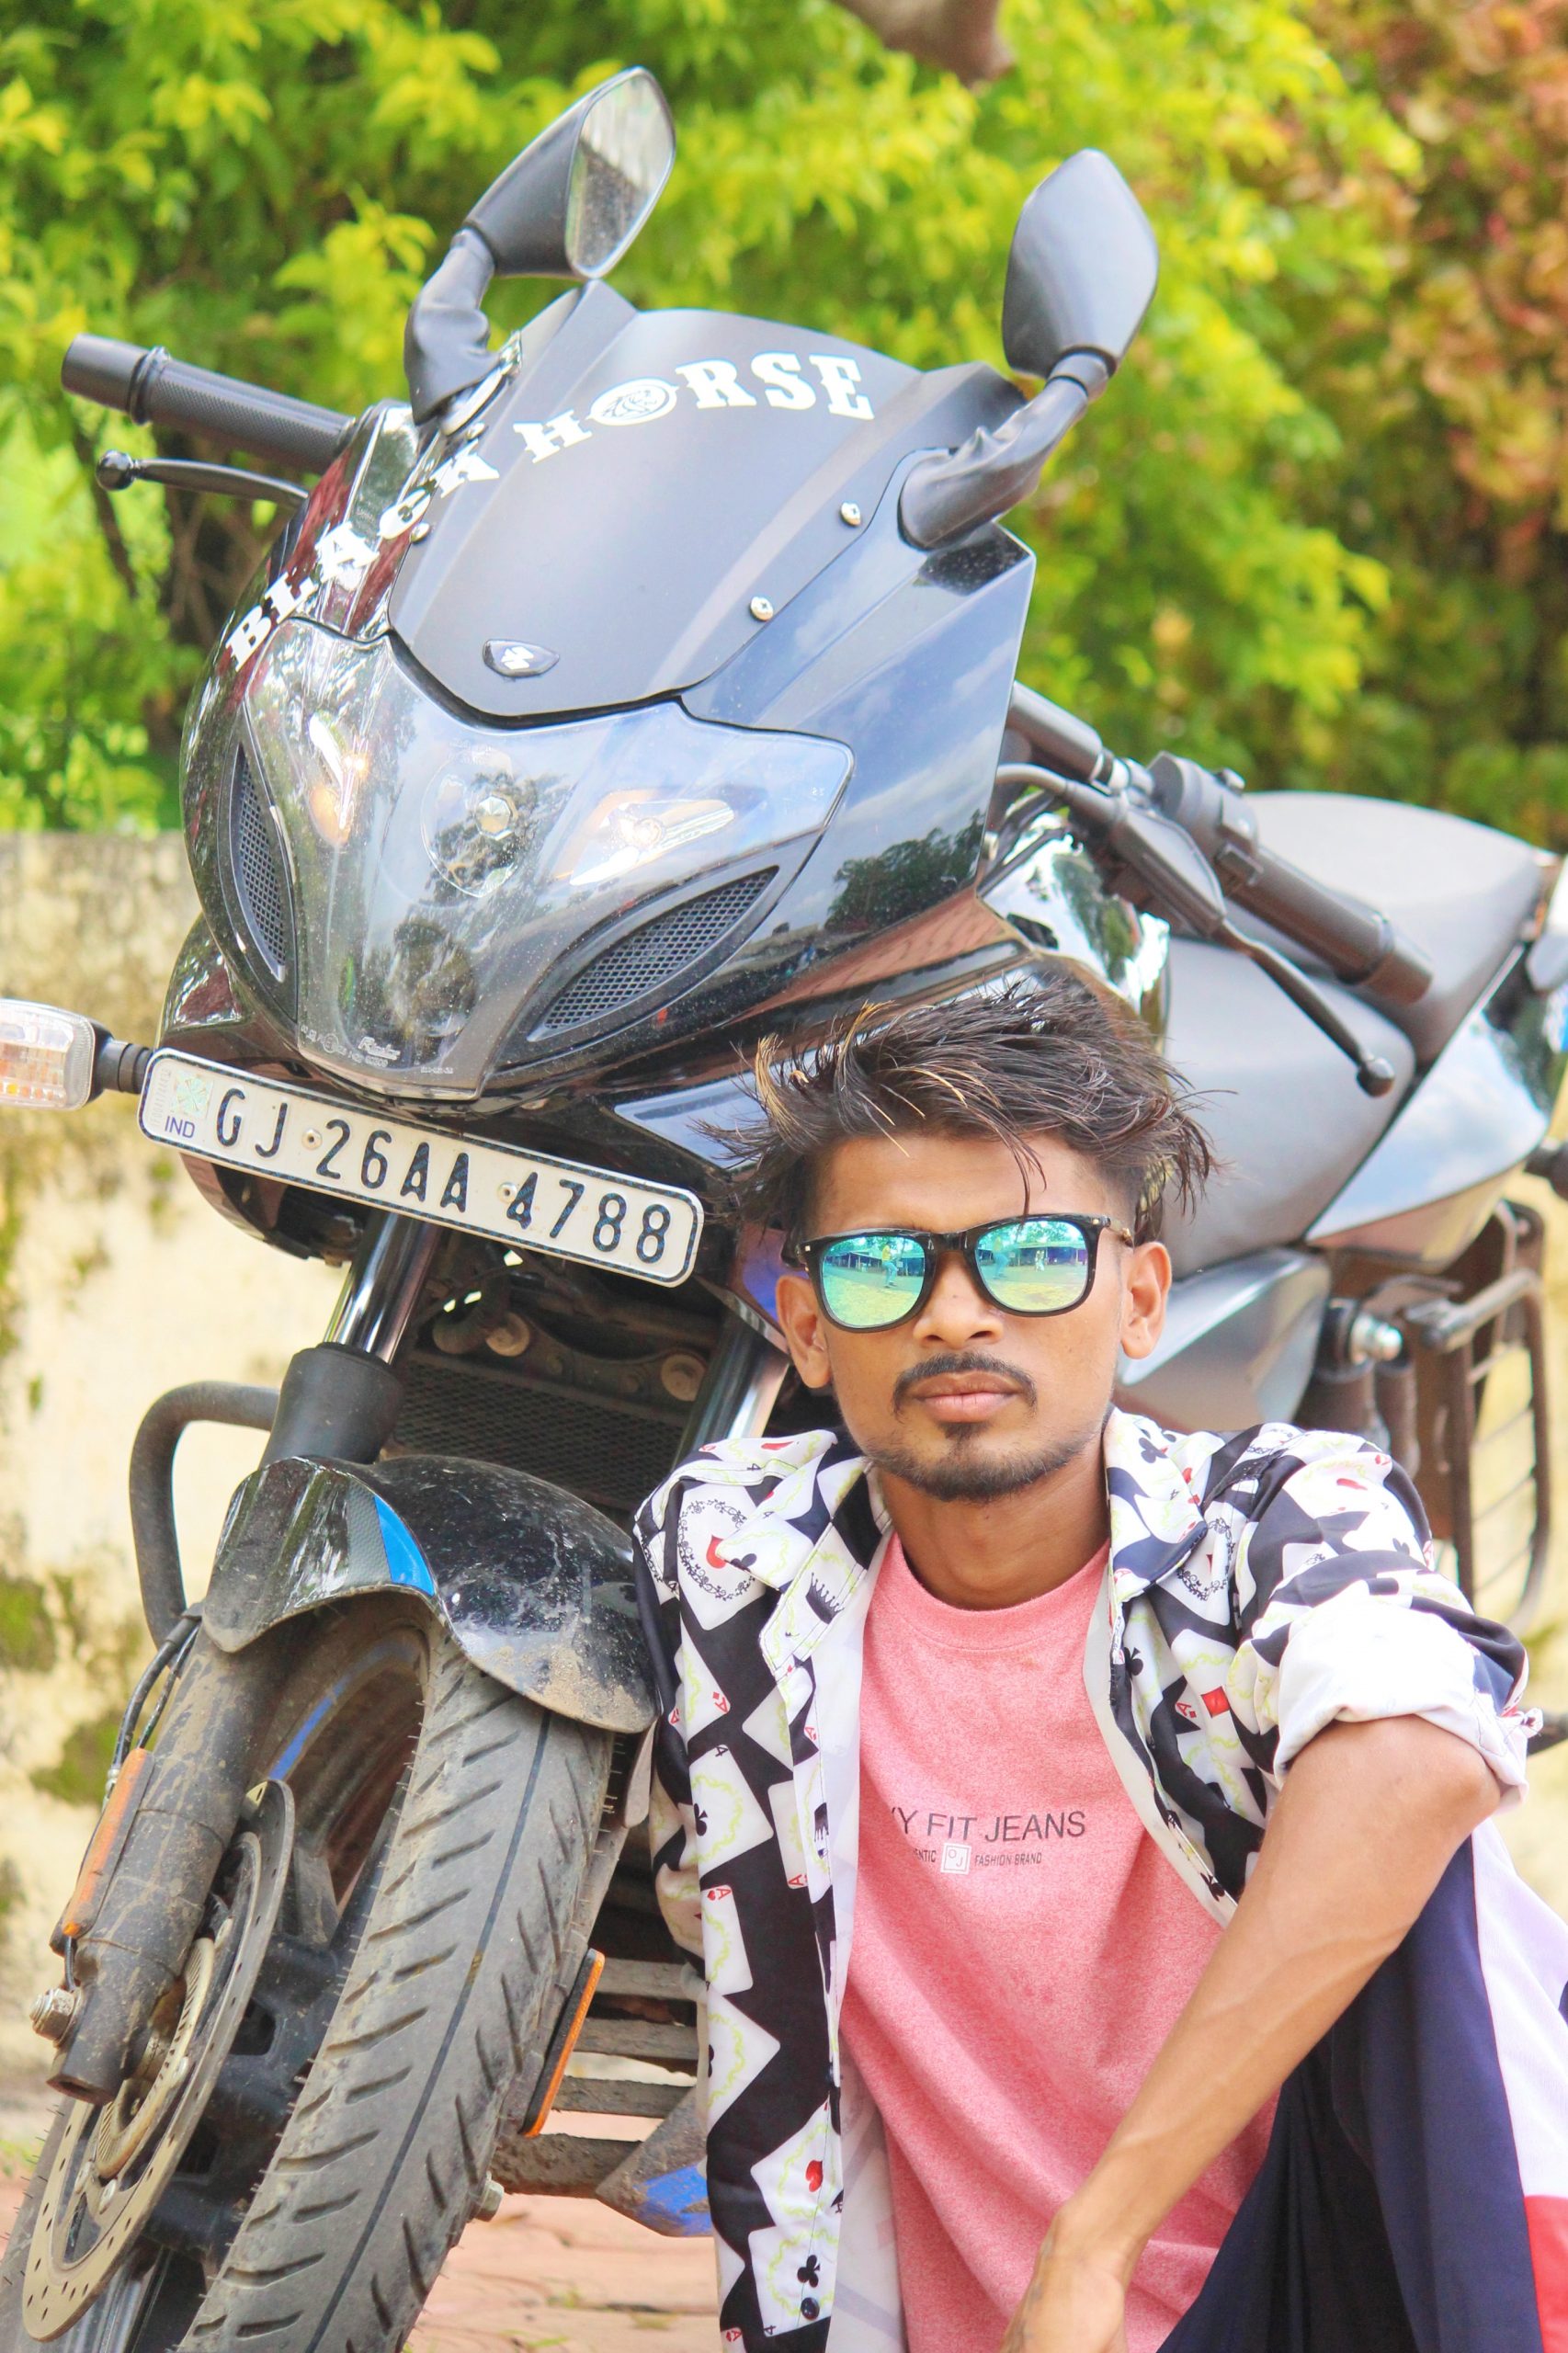 HOW TO POSE ON BIKE / TIPS MOTORCYCLE पर PHOTOSHOOT कैसे करे। - YouTube